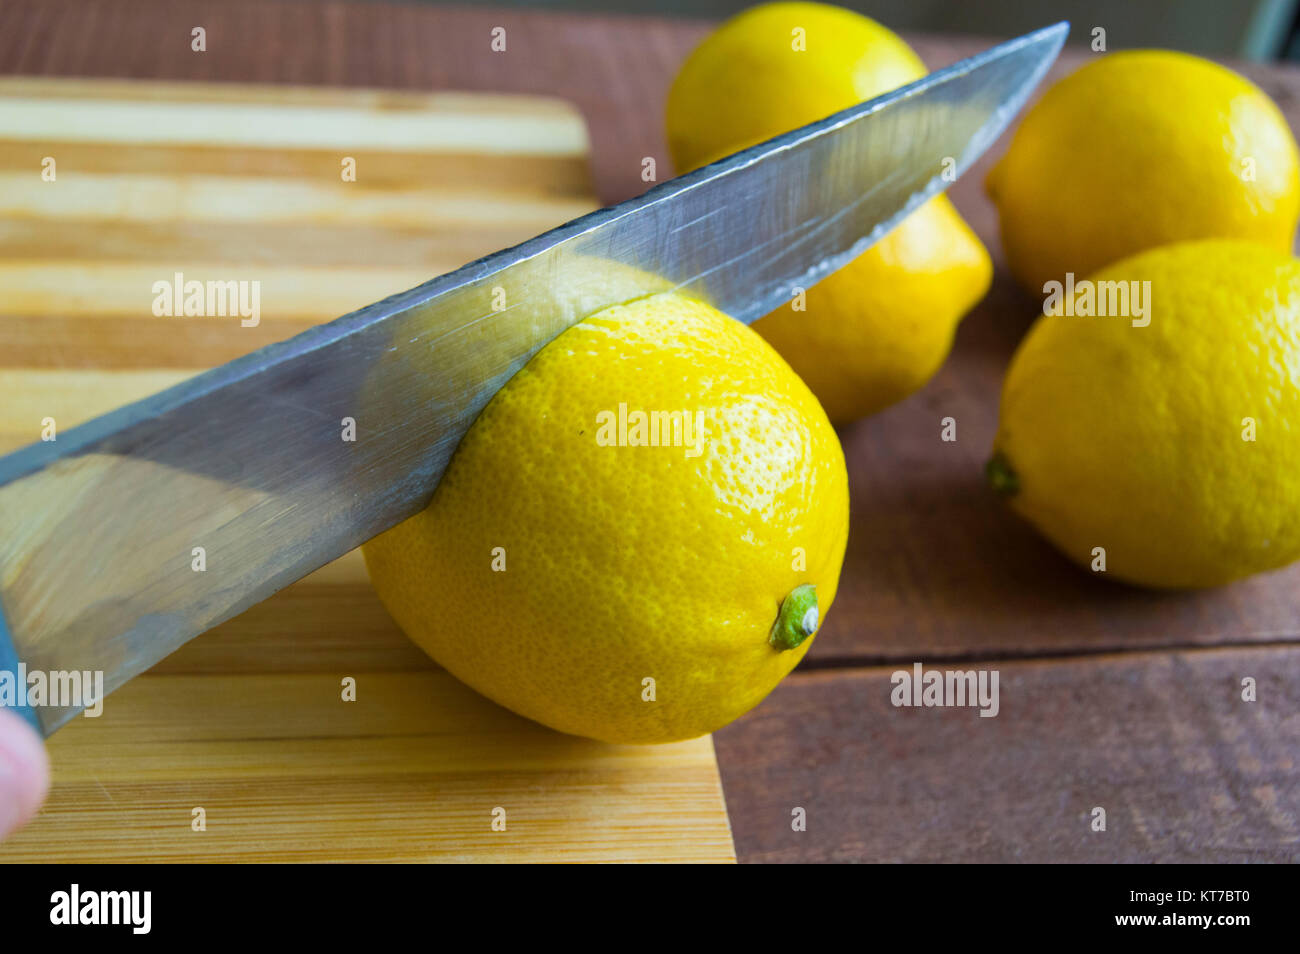 Knife and lemon pictures ready to cut on the table Fresh juicy lemon on top of the salad and fresh for the fish Ready-to-serve lemon pictures, When the lemon is cut Stock Photo